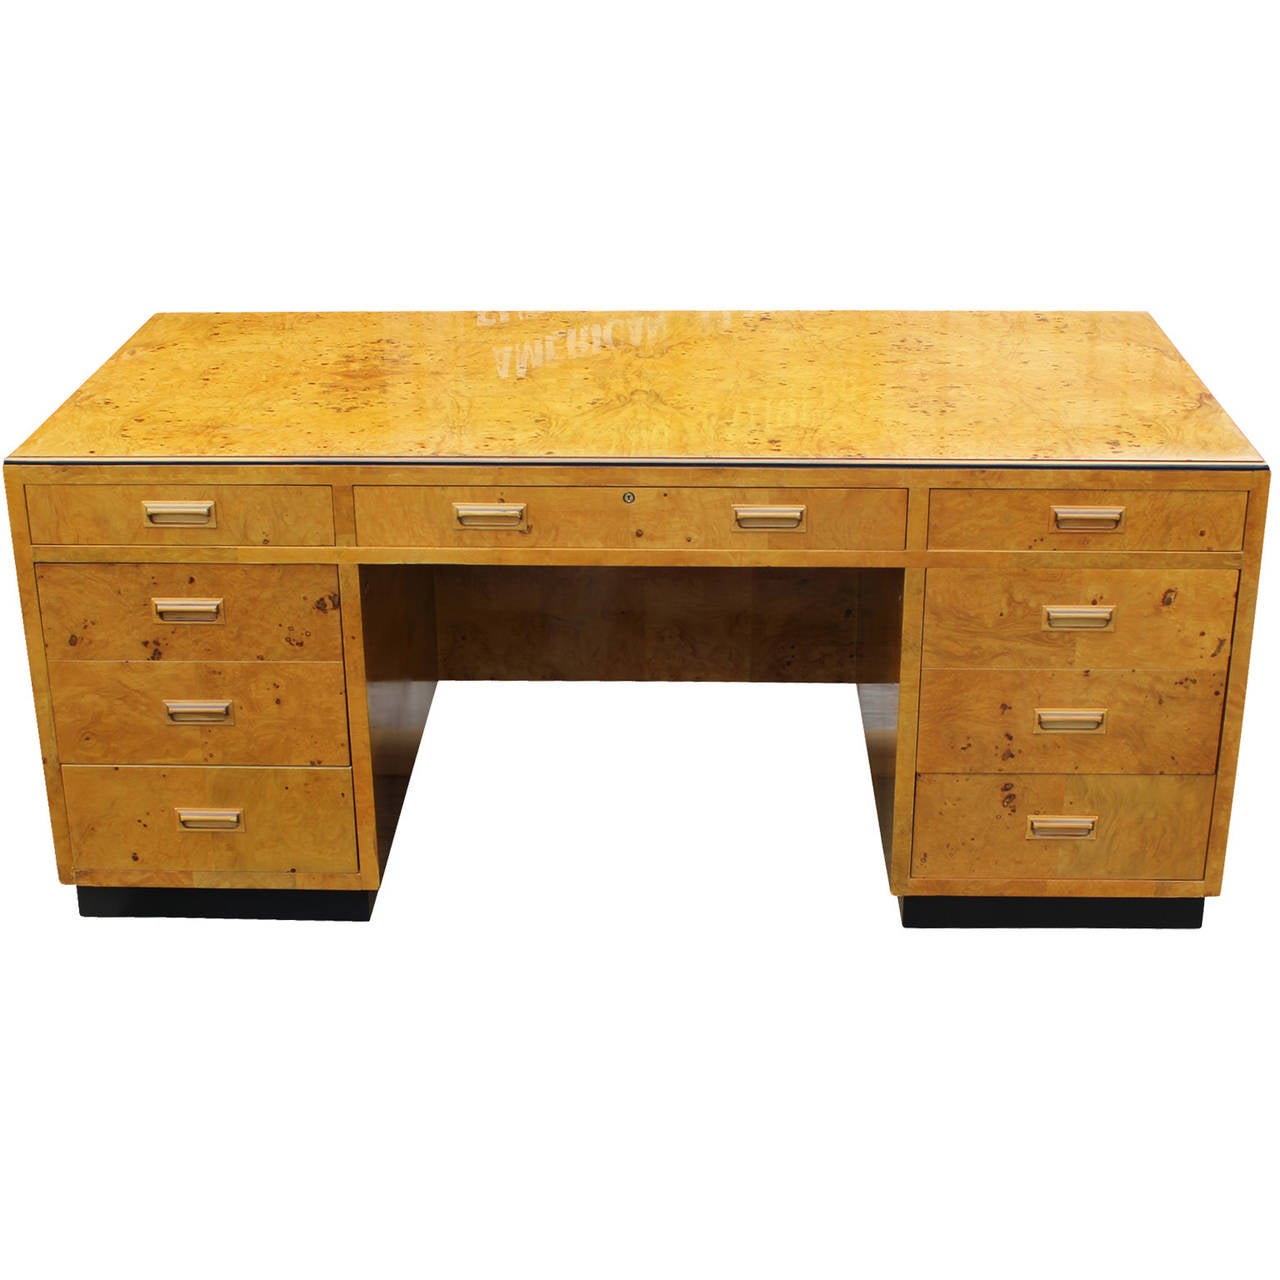 Fabulous executive desk by Henredon, series II. Desk is veneered in the most beautiful blonde burl wood. Desk has been masterfully restored. It has three pull out writing surfaces: one on the right, left, and back. Nine drawers provide excellent